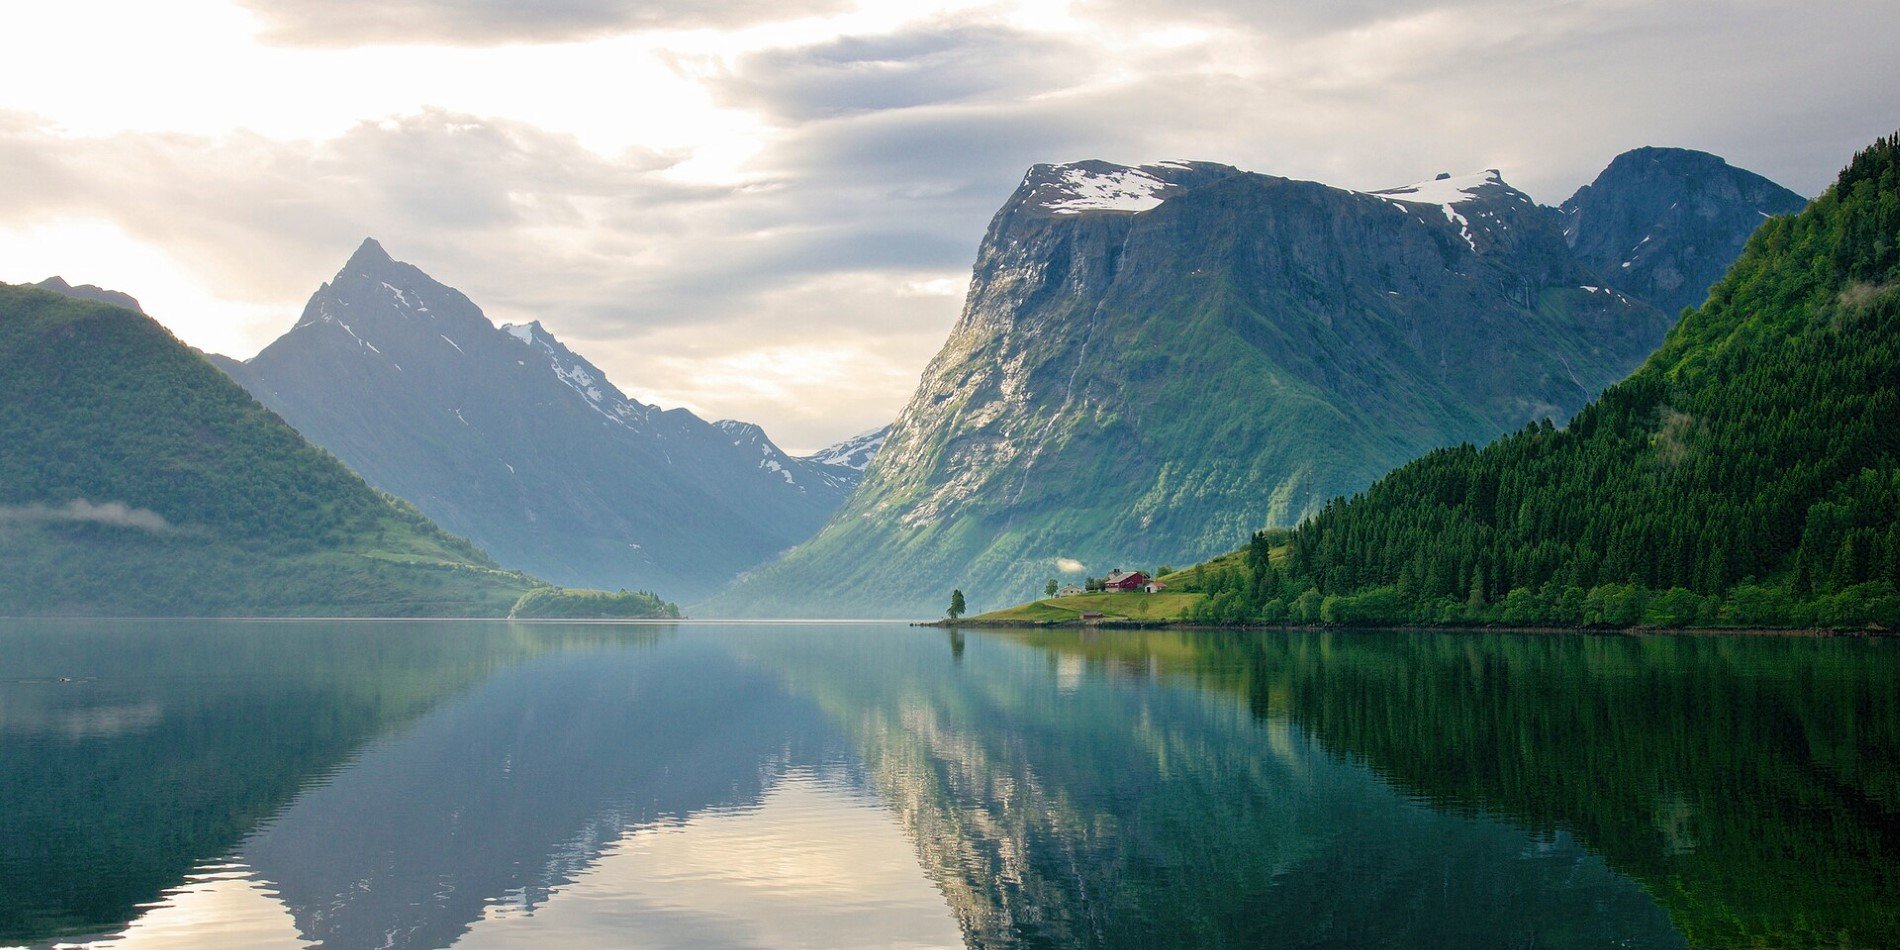 Reflections in the waters of the Hjørundfjord in Norway